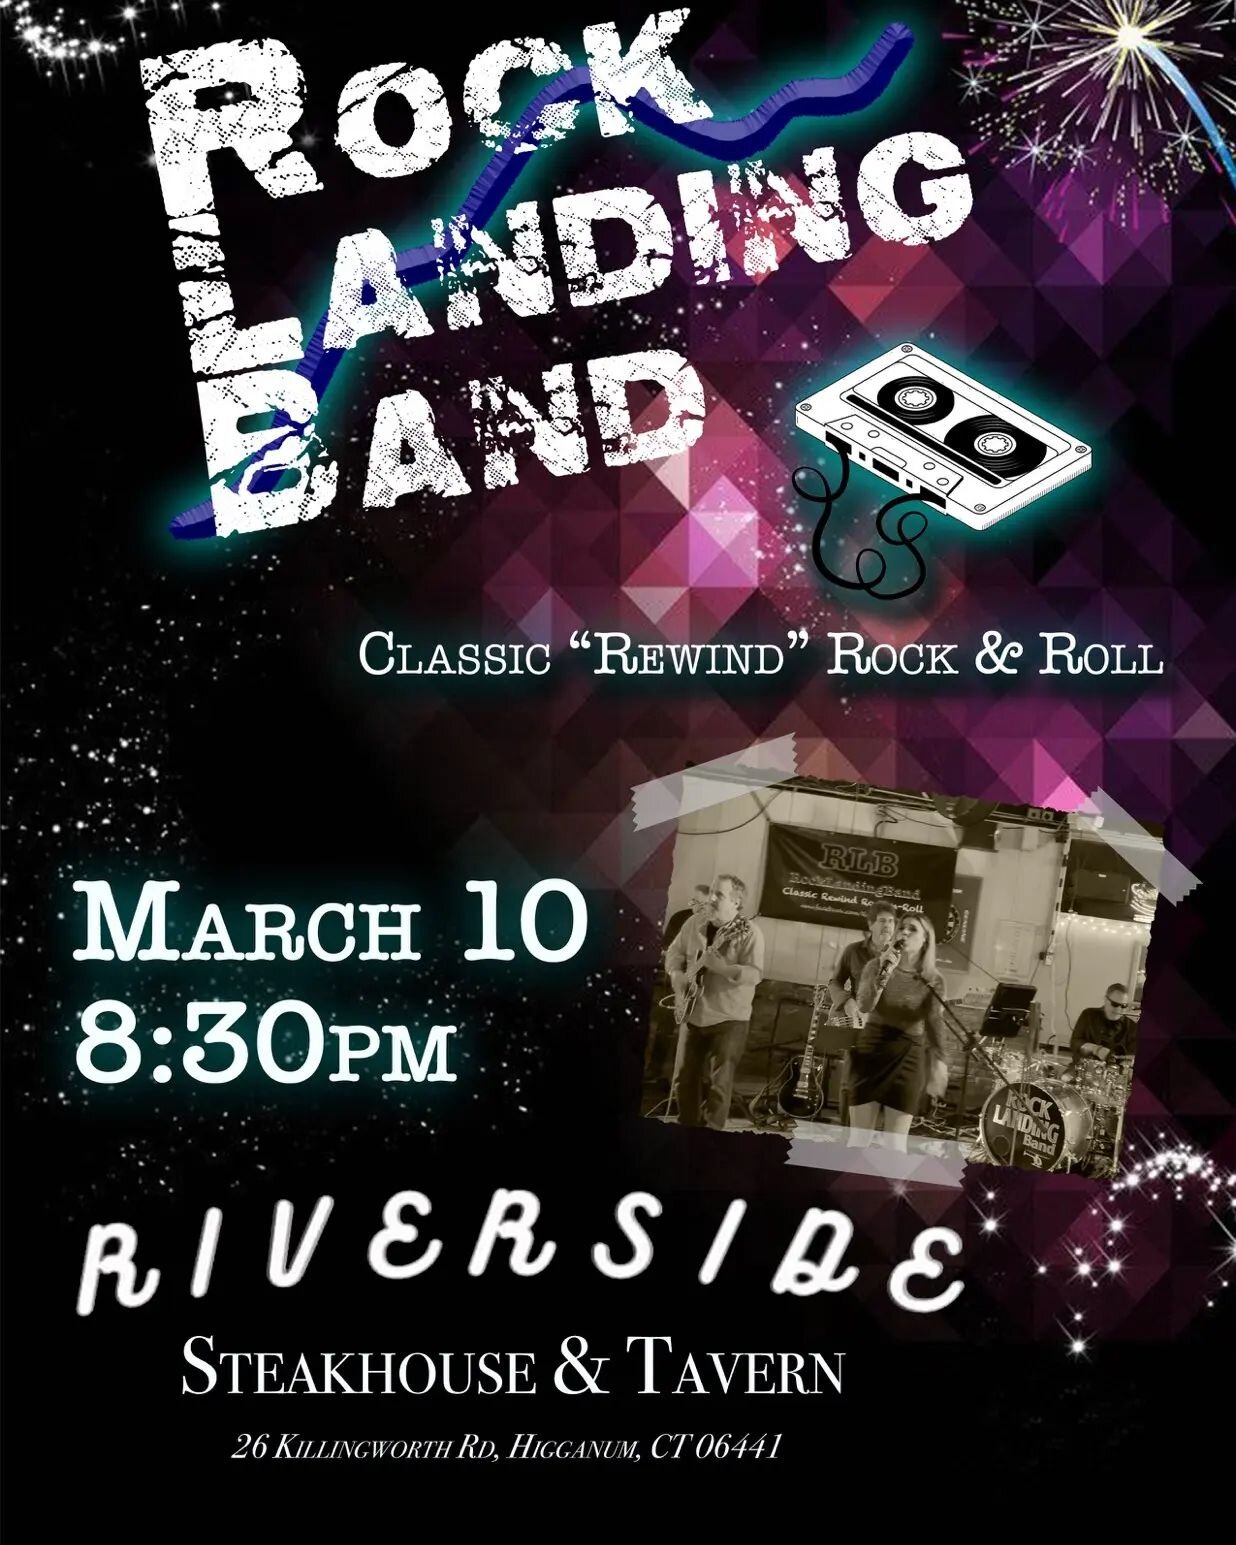 Come rock out with us at Riverside on March 10th!  #rocklandingband #rocklanding #riversidetavern #ctlivemusic